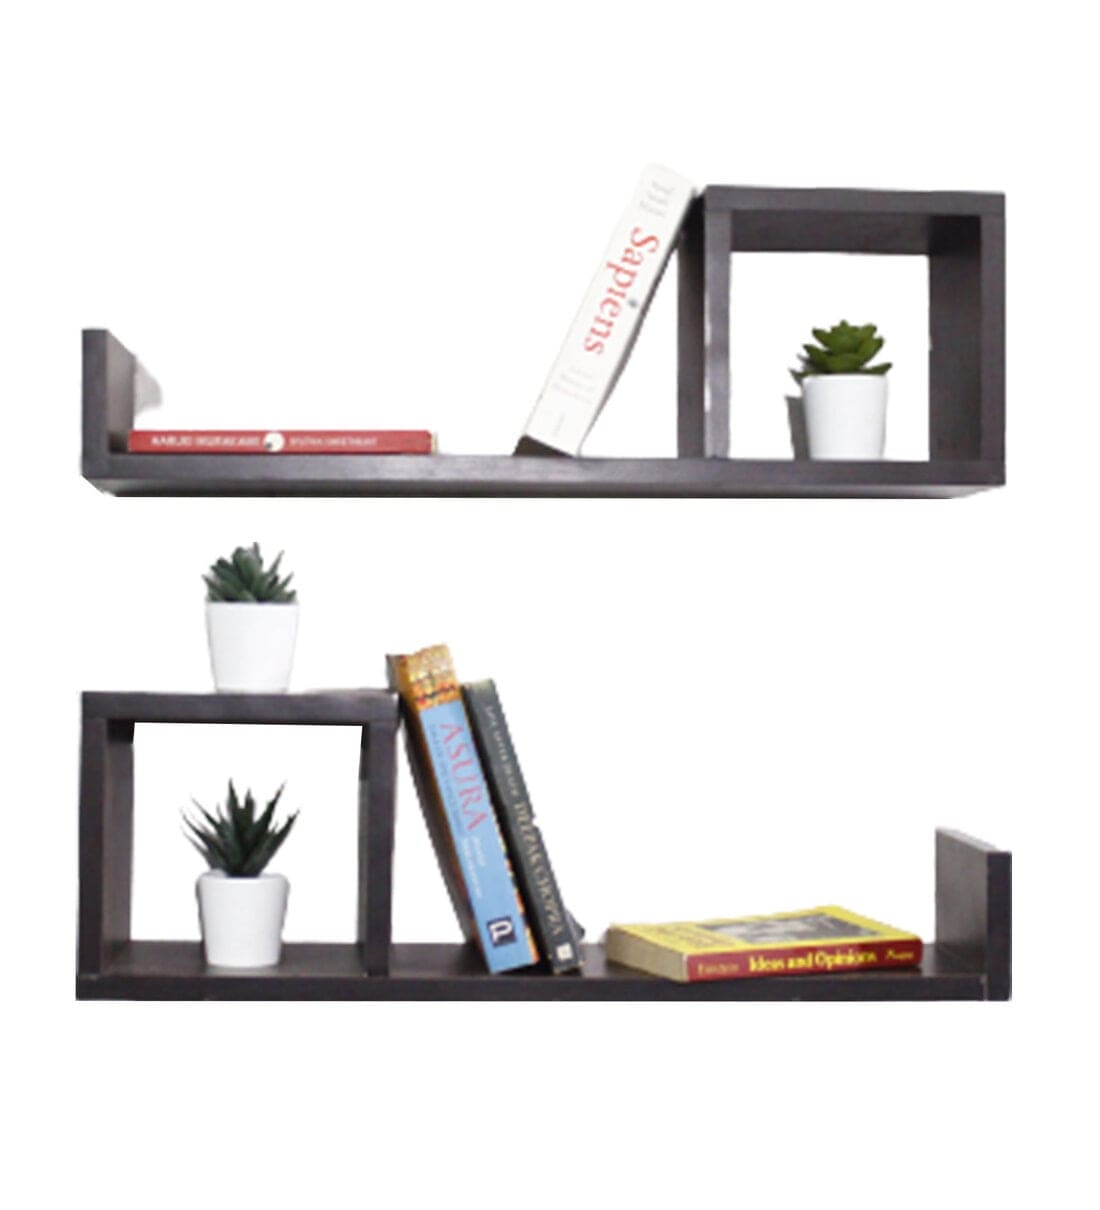 Raytrees Wooden Wall/Book Shelevs- Set of 2